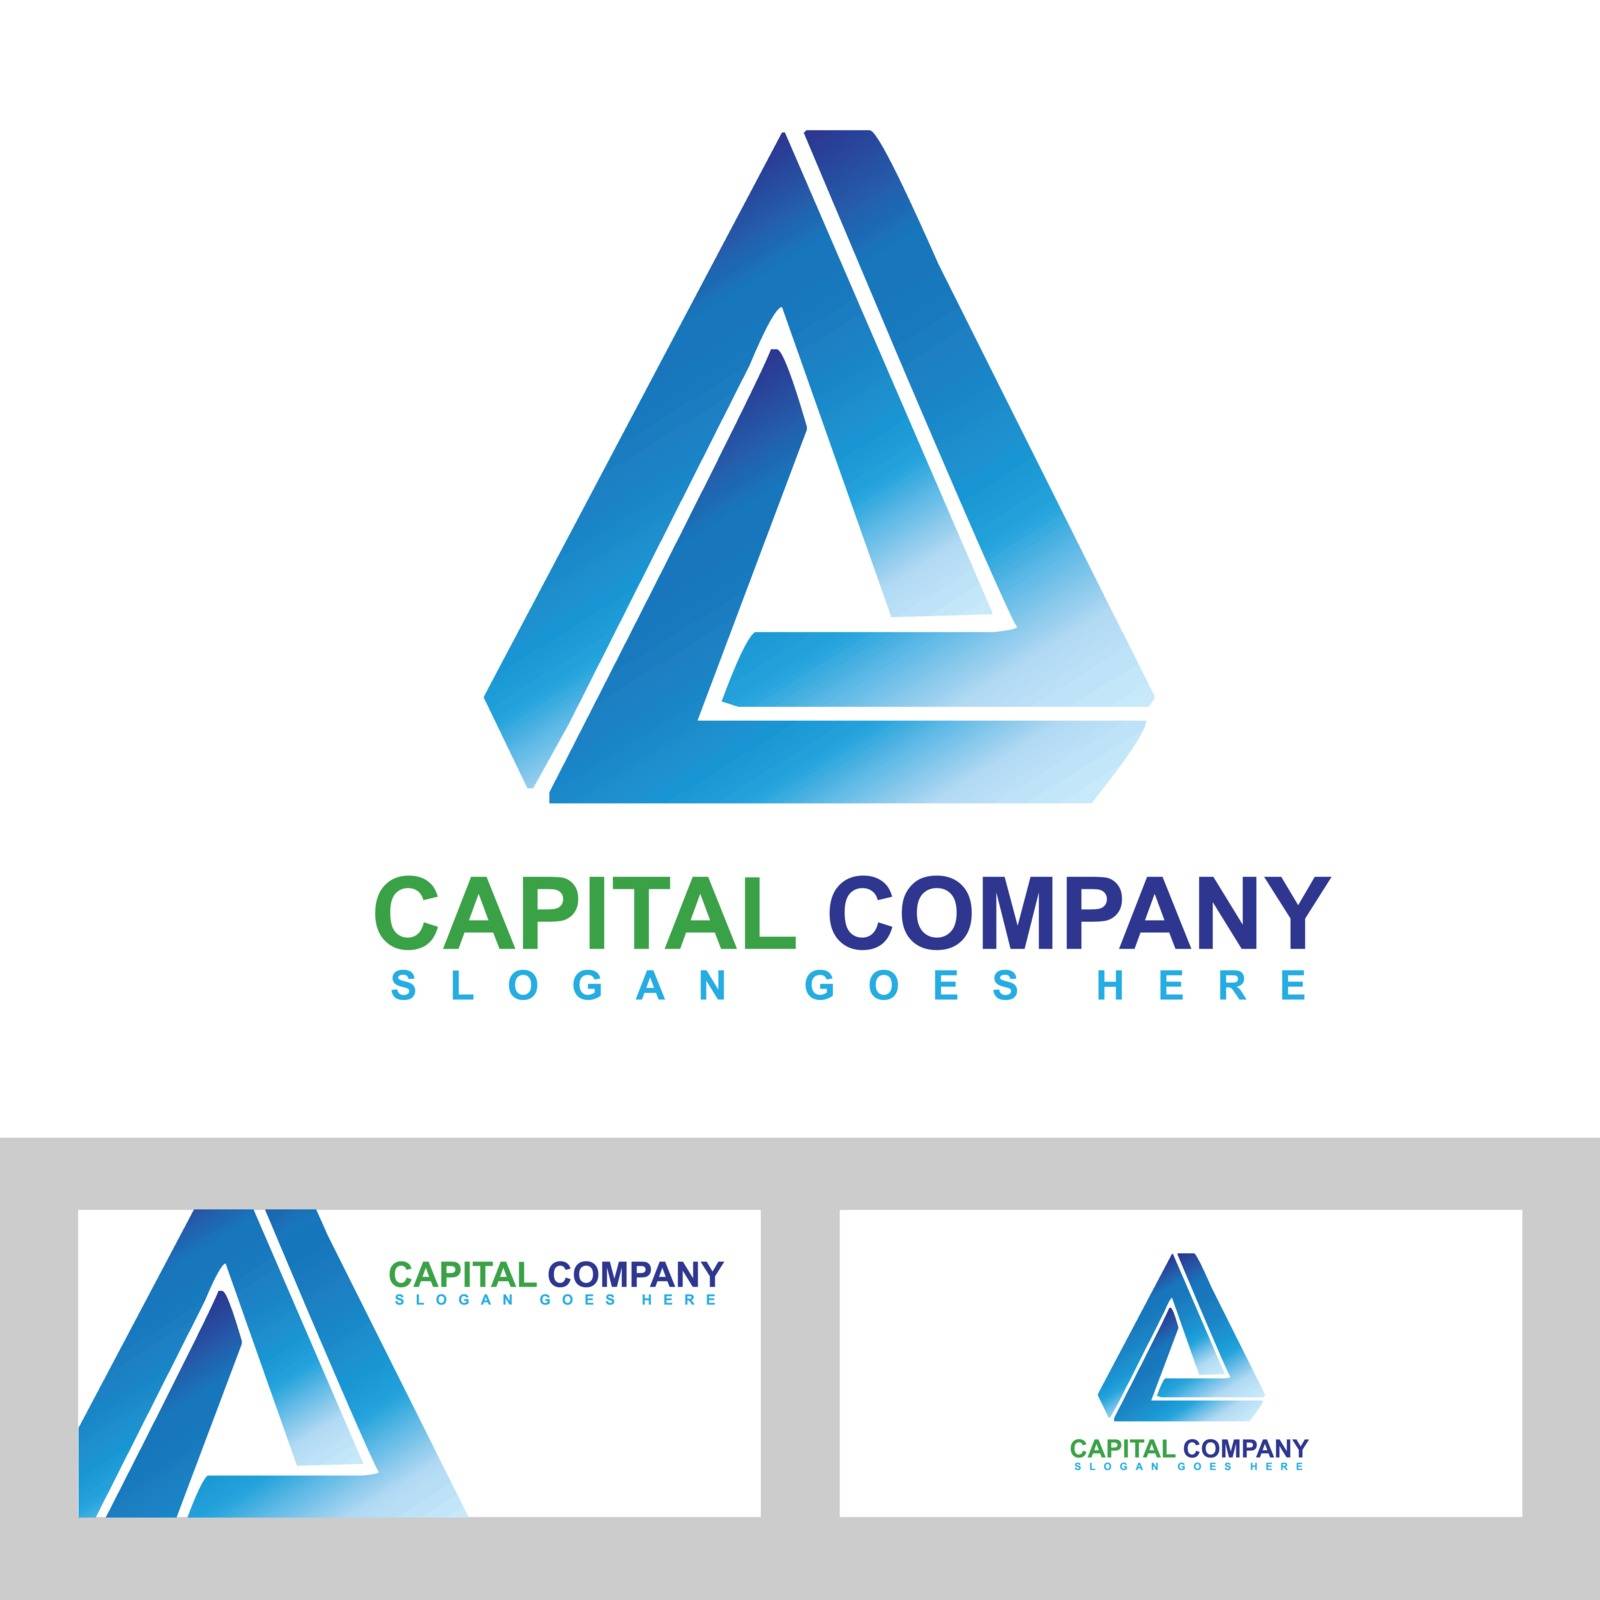 Creative logo vector template for corporate or investment business